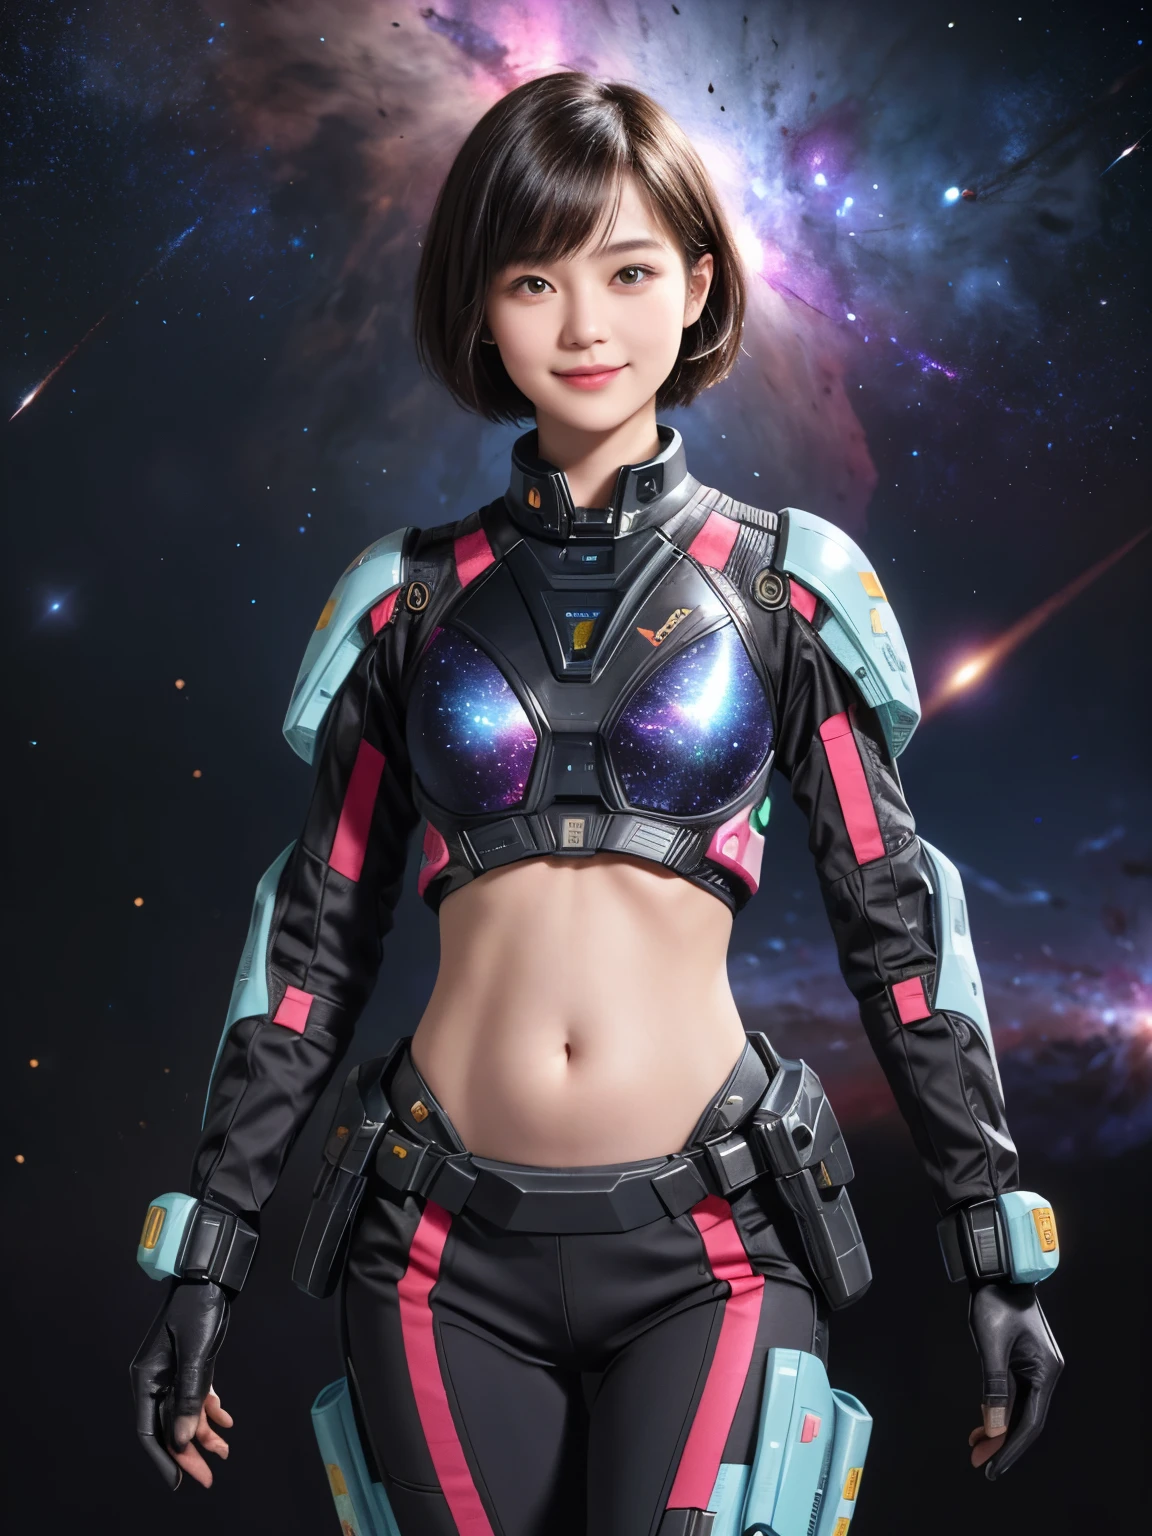 213 Short Hair, 20-year-old woman, A kind smile, Floral, Futuristic clothing, machinery suit, (The background is a galaxy and nebula), ((Clothes that show the stomach))